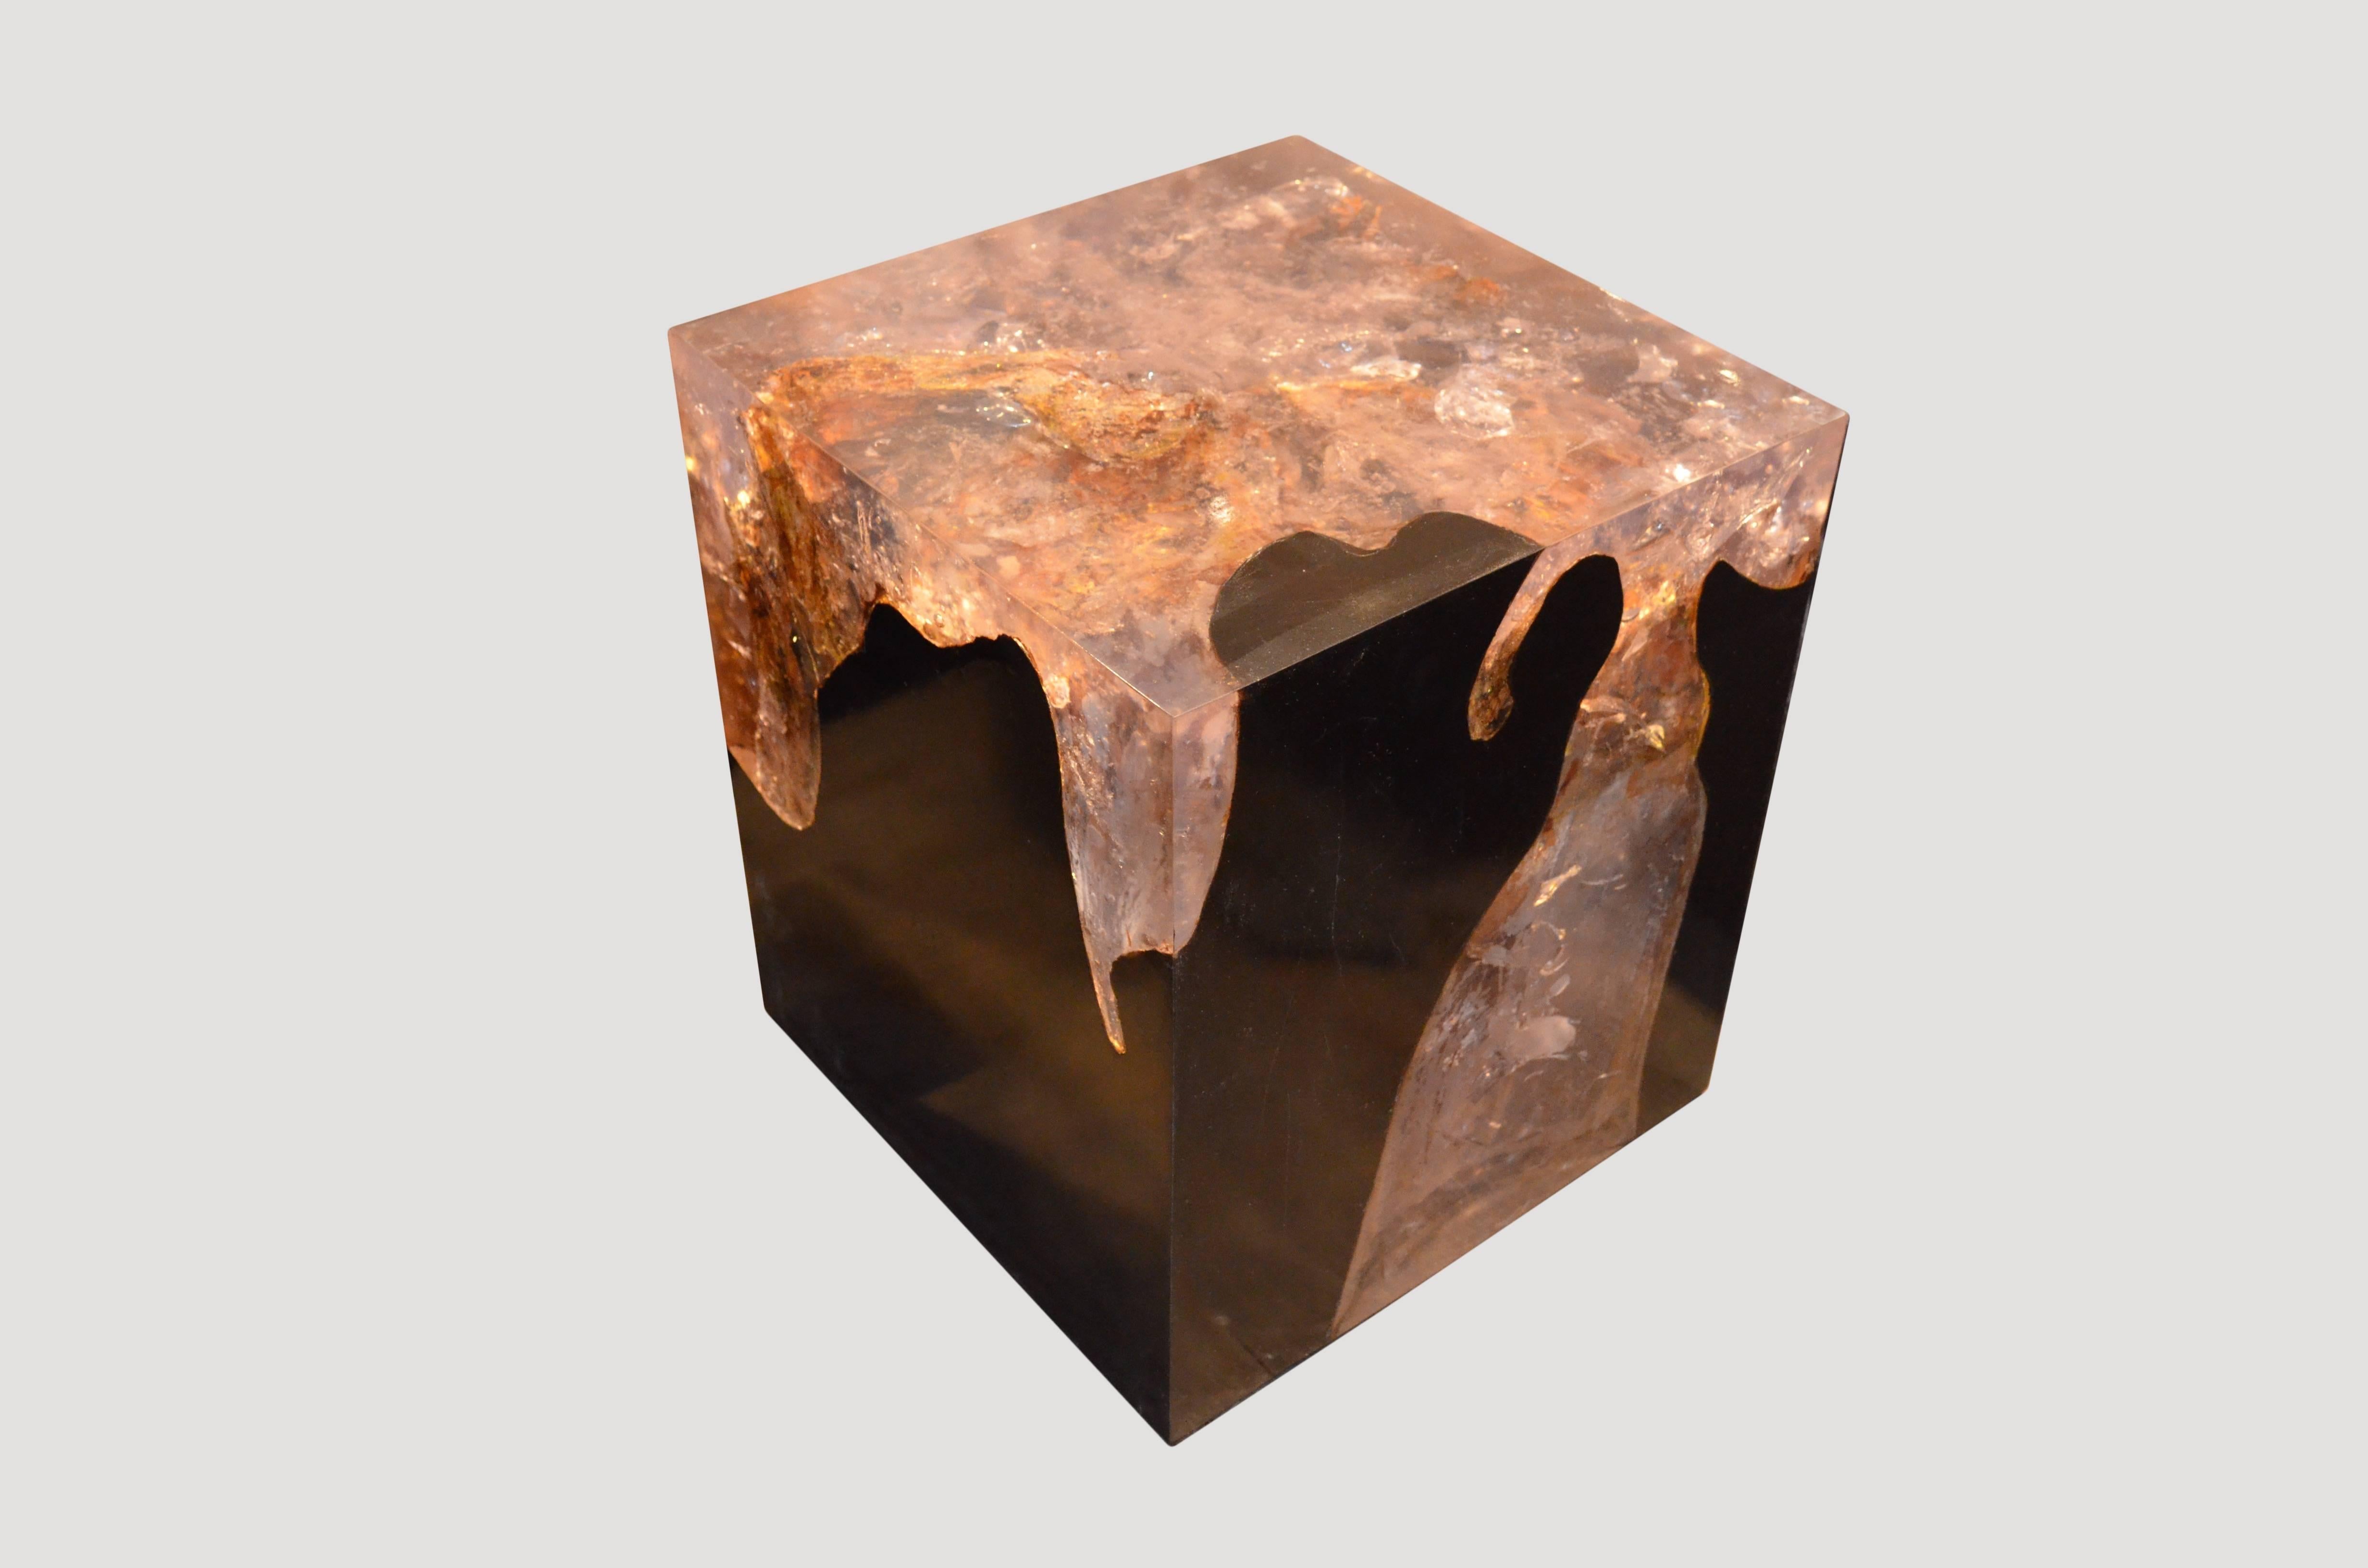 The Cracked Resin cocktail table is made from teak infused with resin. A dramatic piece due to the depth of the resin, which resembles a unique quartz crystal with many different facets. An impressive addition to any space.

The Cracked Resin